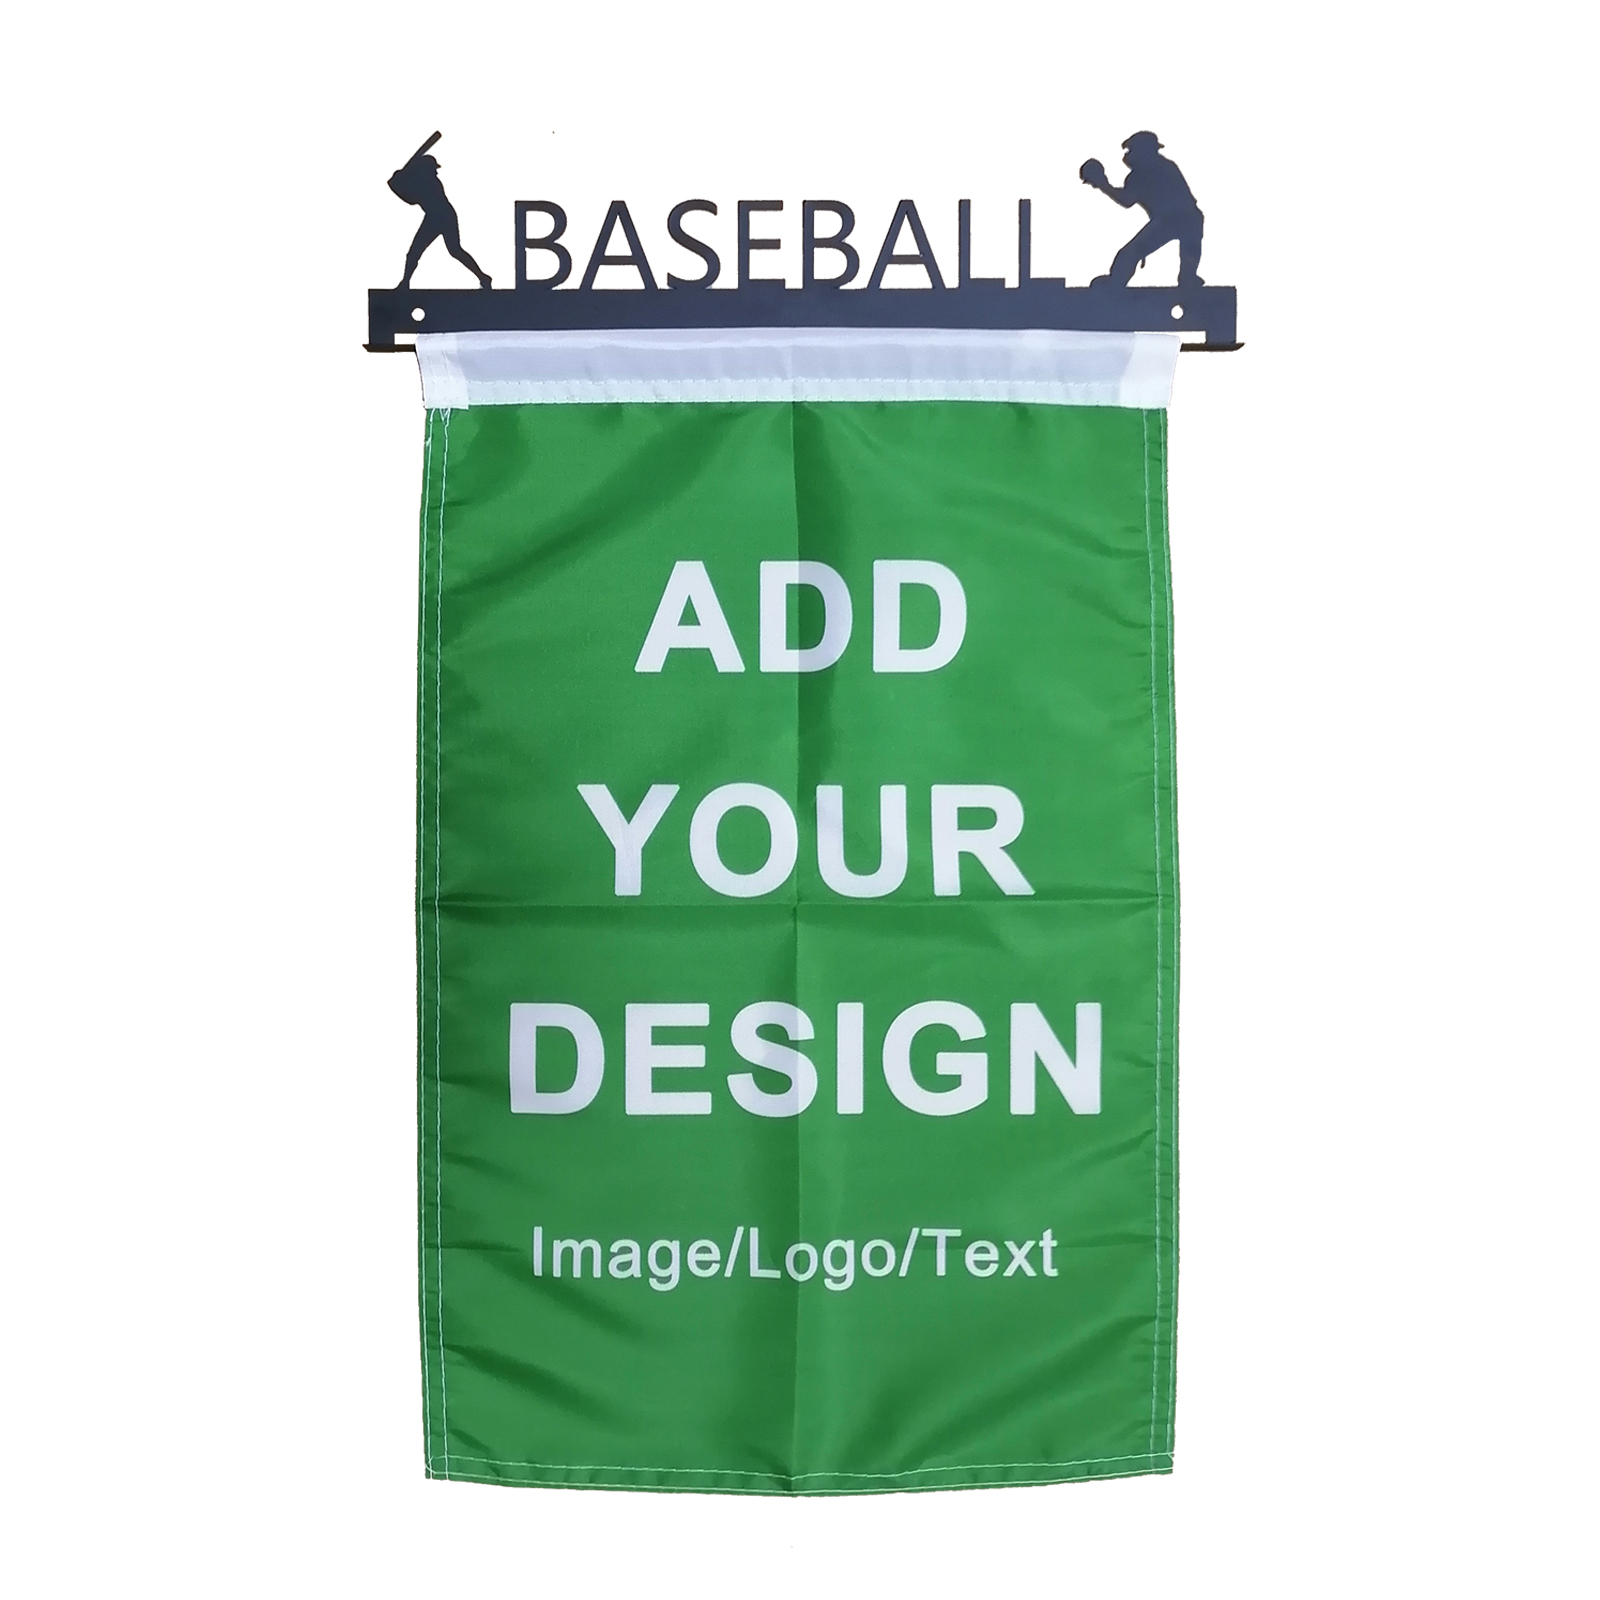 Personalised Flag Custom Banner with Baseball Wrought Iron Flag Stand Wall Hanger